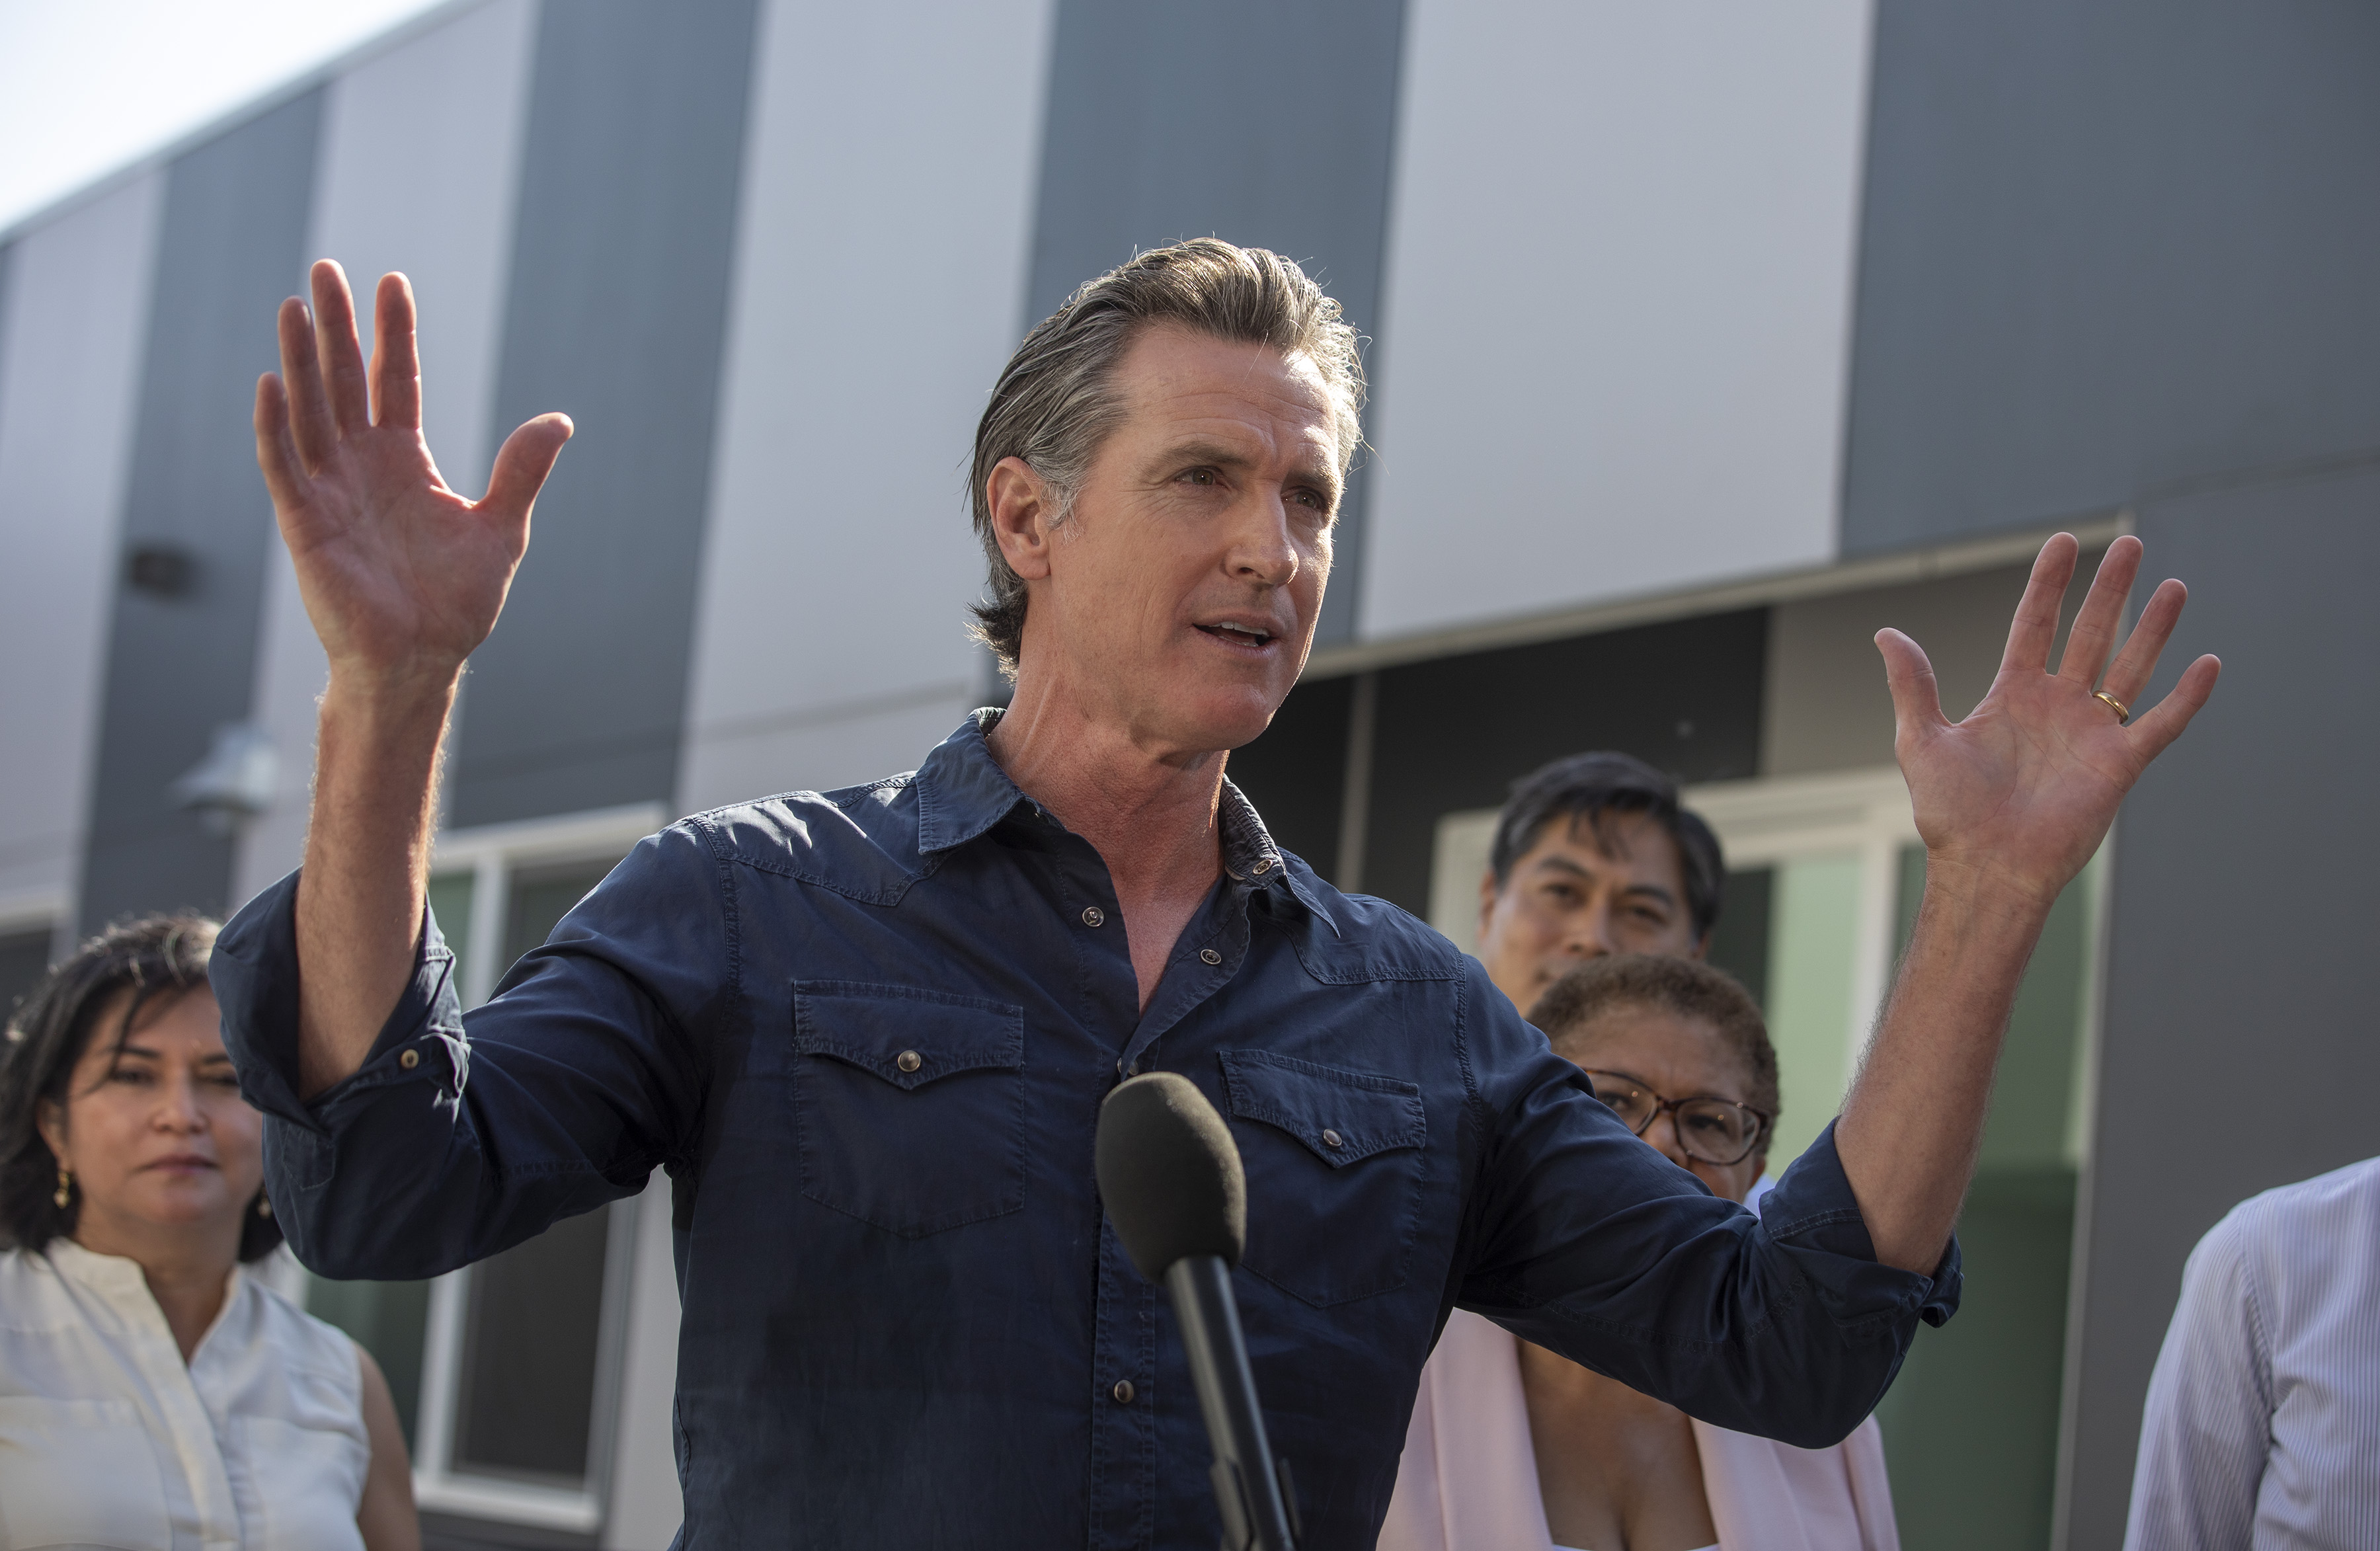 A man in a blue shirt is speaking outdoors, gesturing with both hands raised. He is surrounded by several people, and there's a building with large windows behind them.